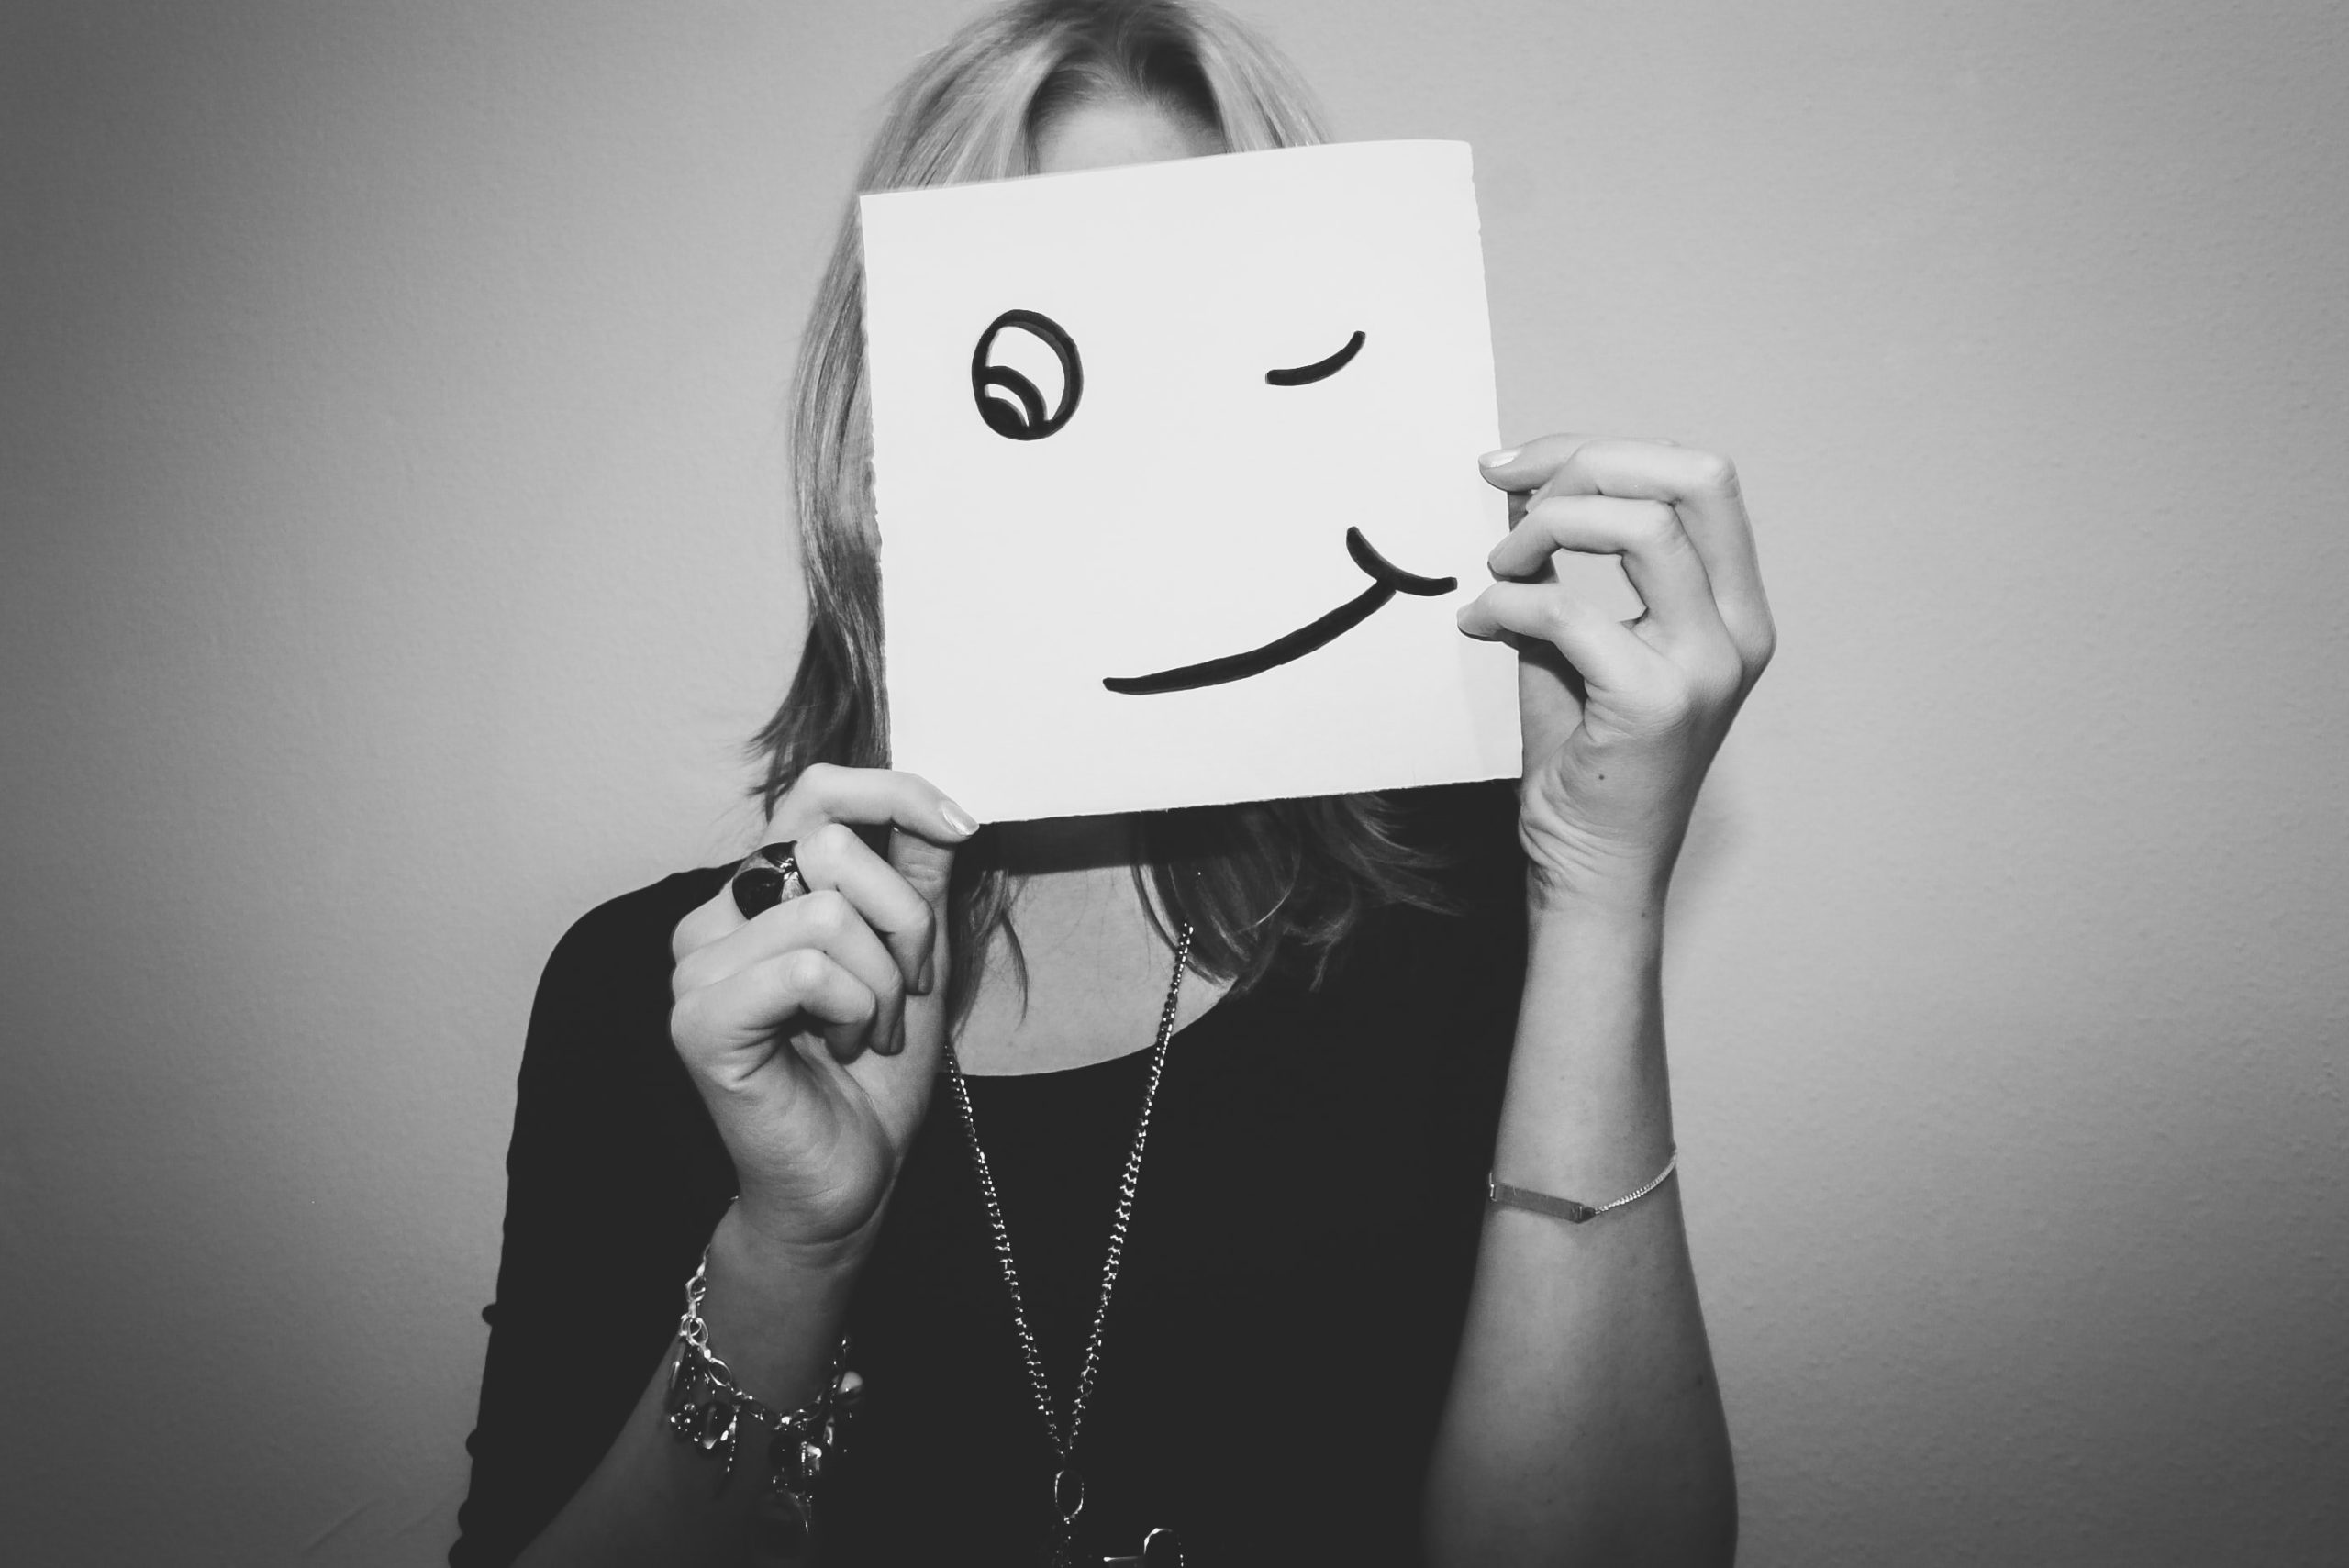 Woman holding up a smiley face card in place of face